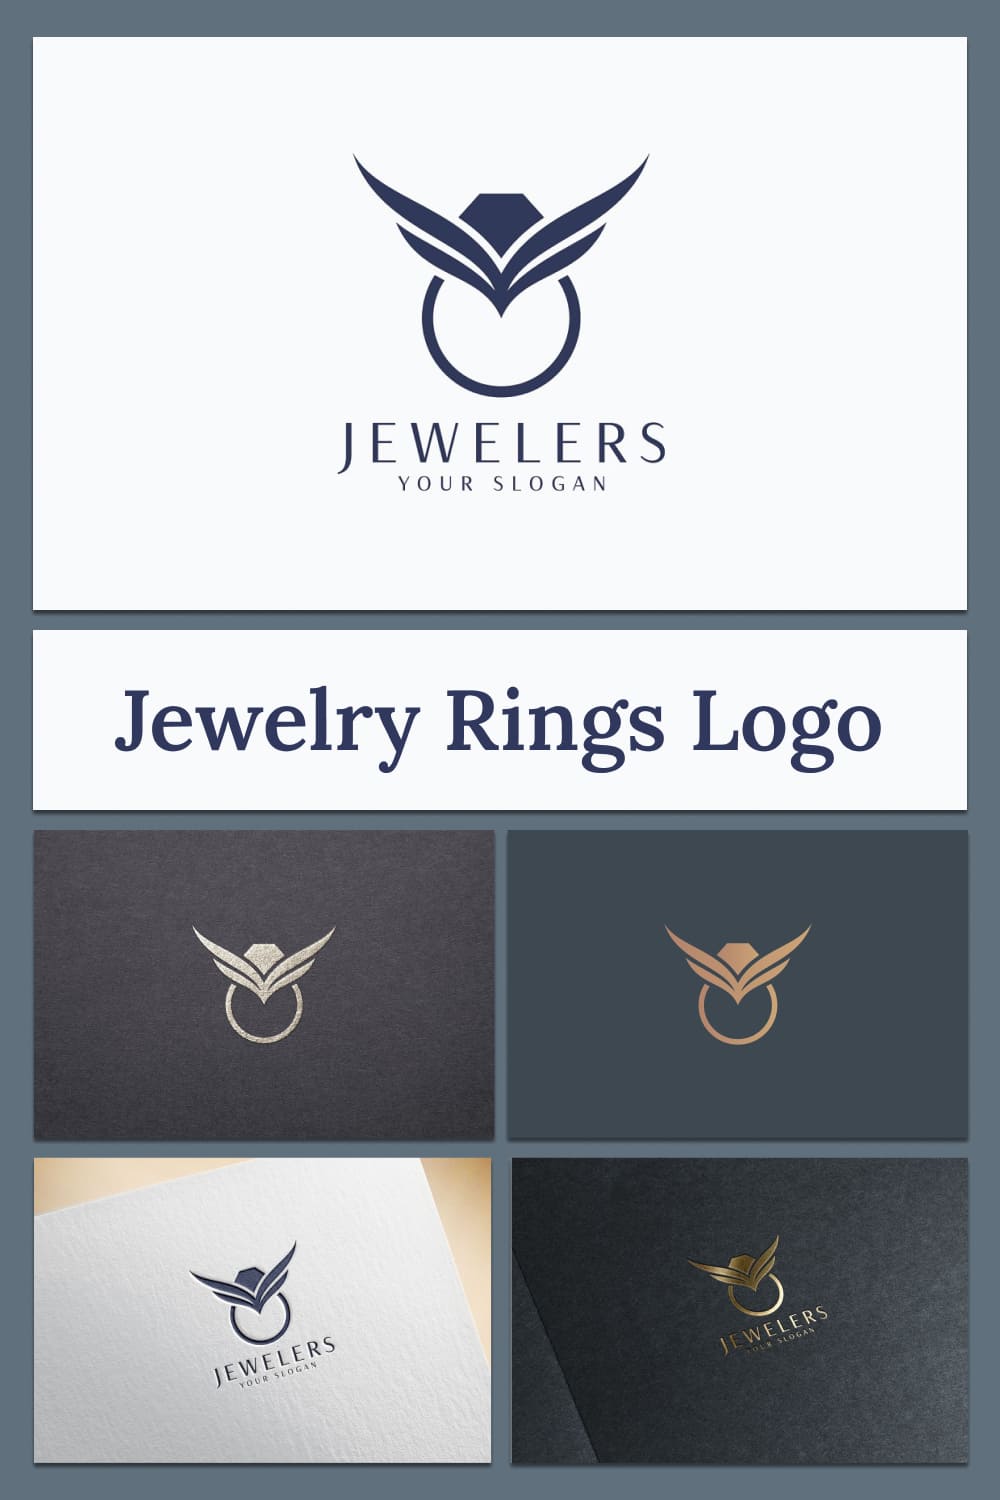 jewelry rings logo for jewelry brand.